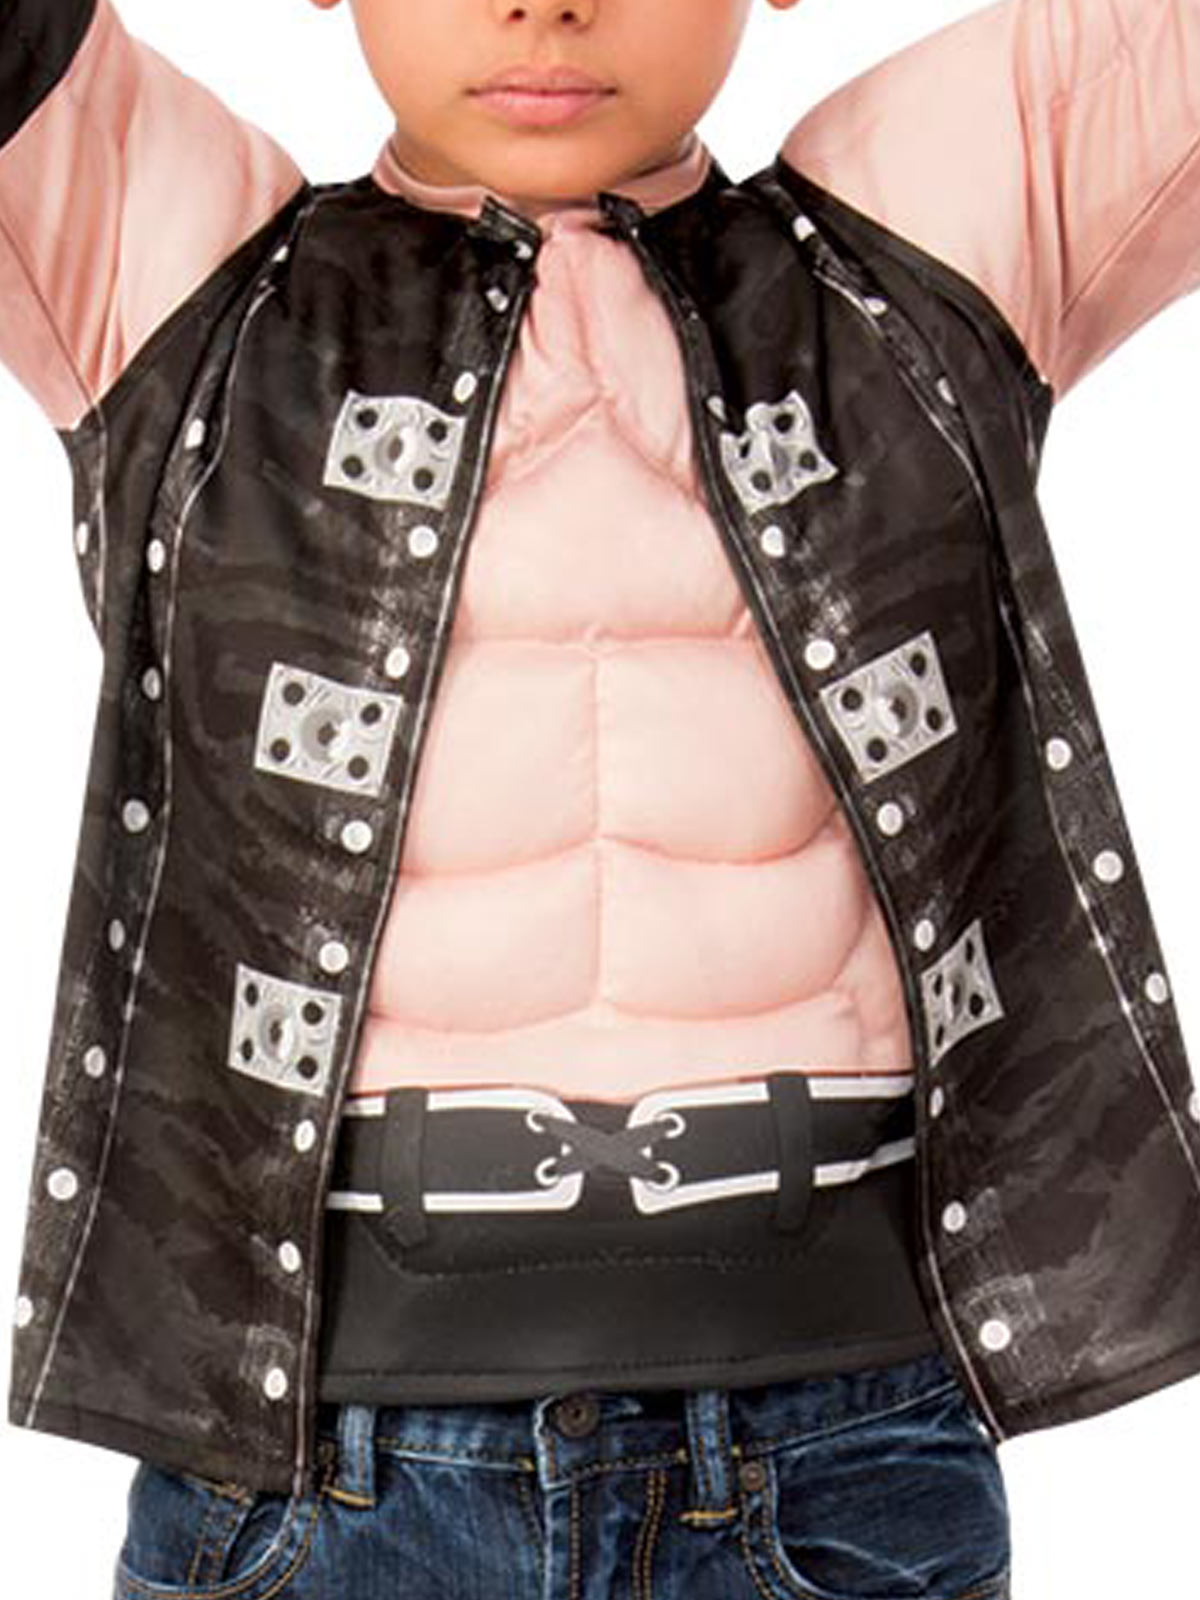 WWE AJ Styles Child Costume with Top and Gloves